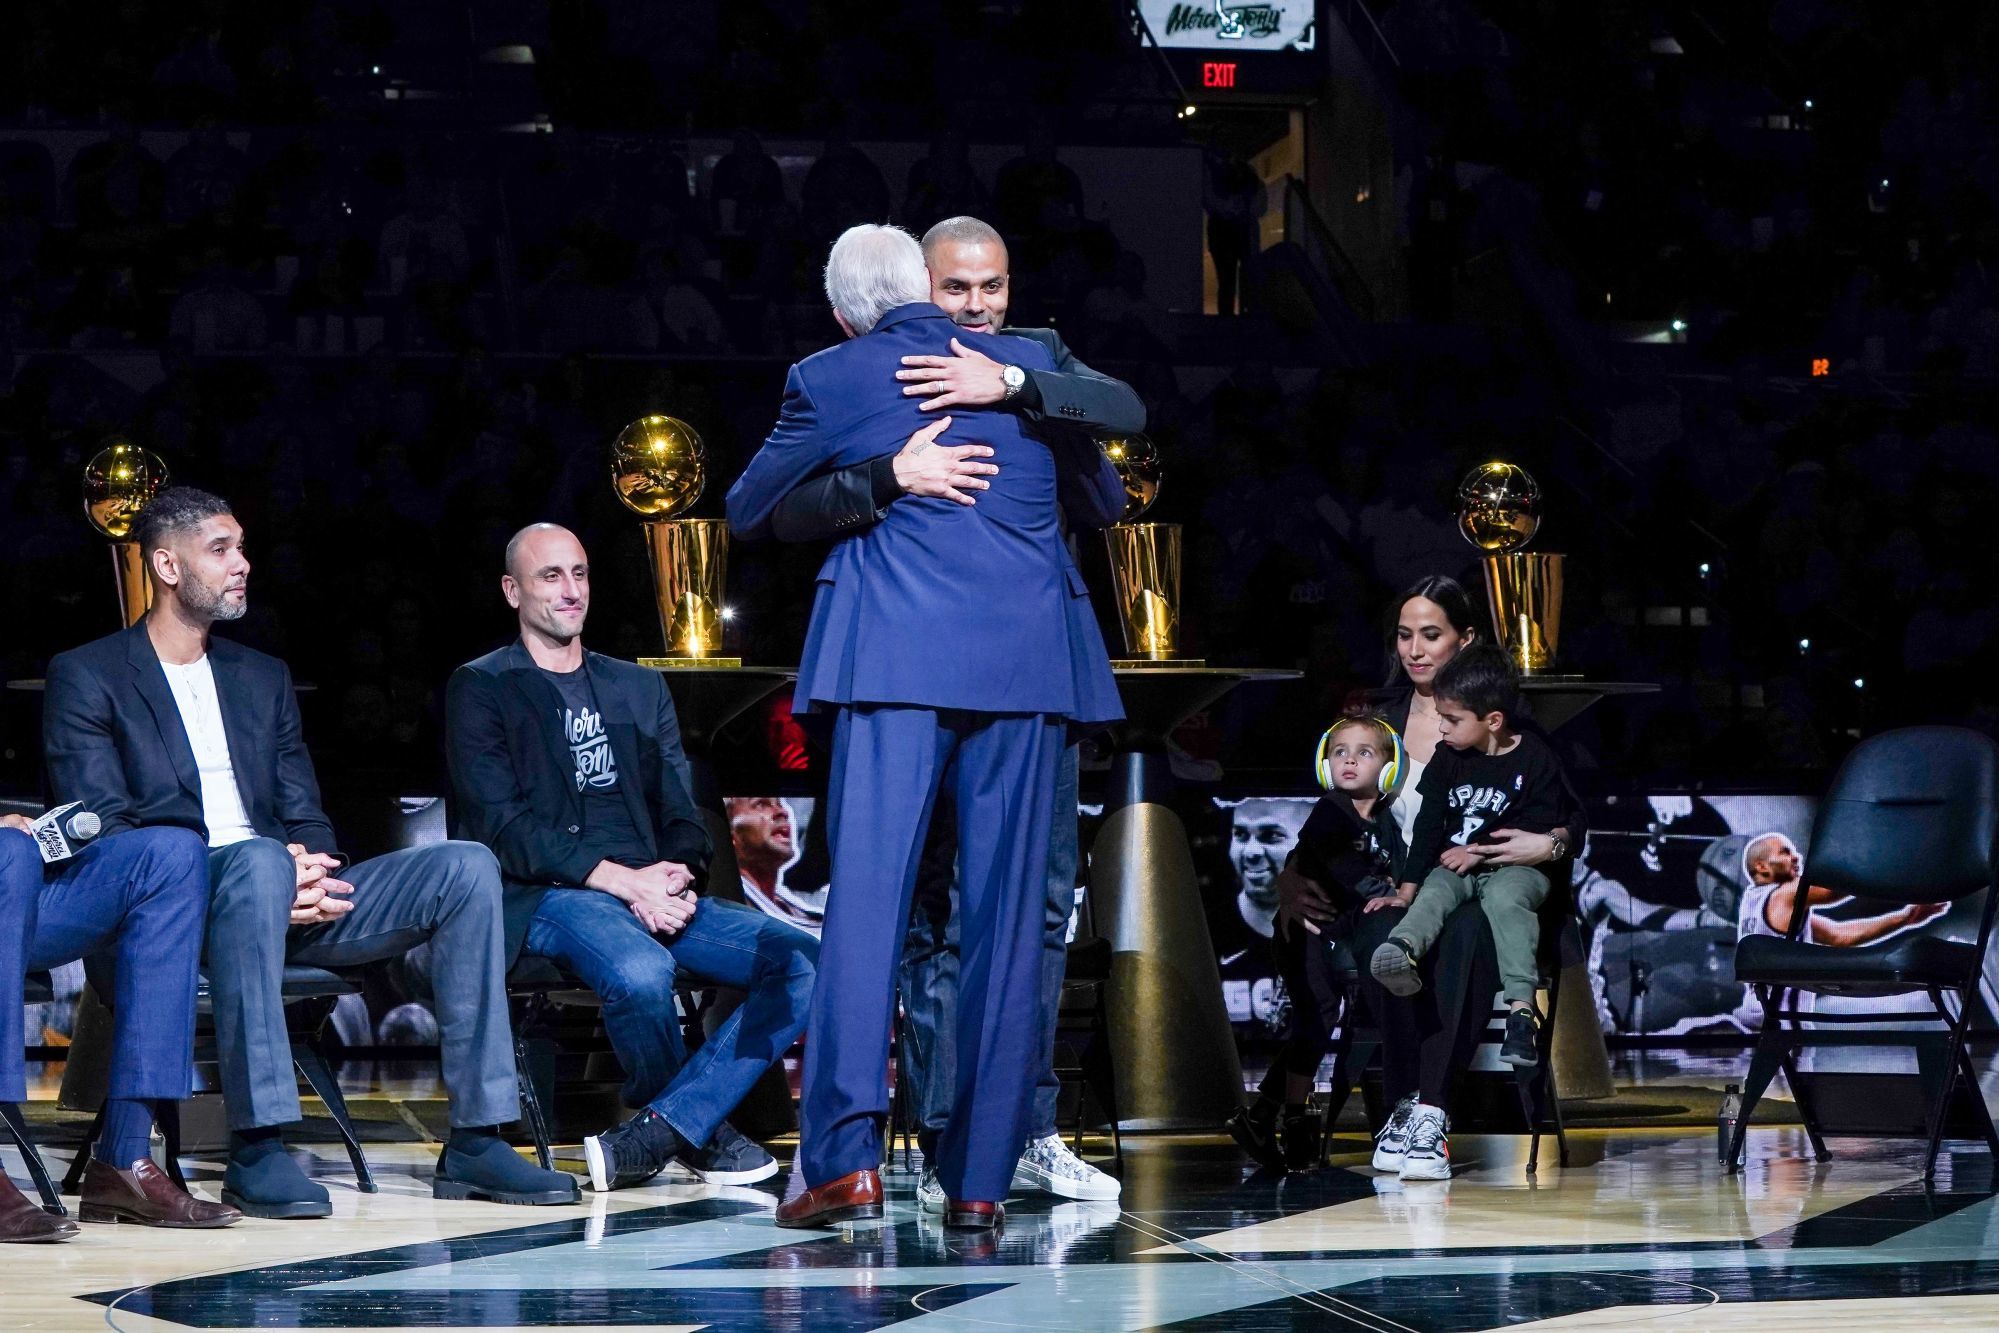 Nov 11, 2019; San Antonio, TX, USA; San Antonio Spurs head coach Gregg Popovich hugs former player Tony Parker during Parker's retirement ceremony at the AT&T Center. Mandatory Credit: Daniel Dunn-USA TODAY Sports/Sipa USA 

Photo by Icon Sport - Gregg POPOVICH - Tony PARKER - AT&T Center - San Antonio (Etats Unis)